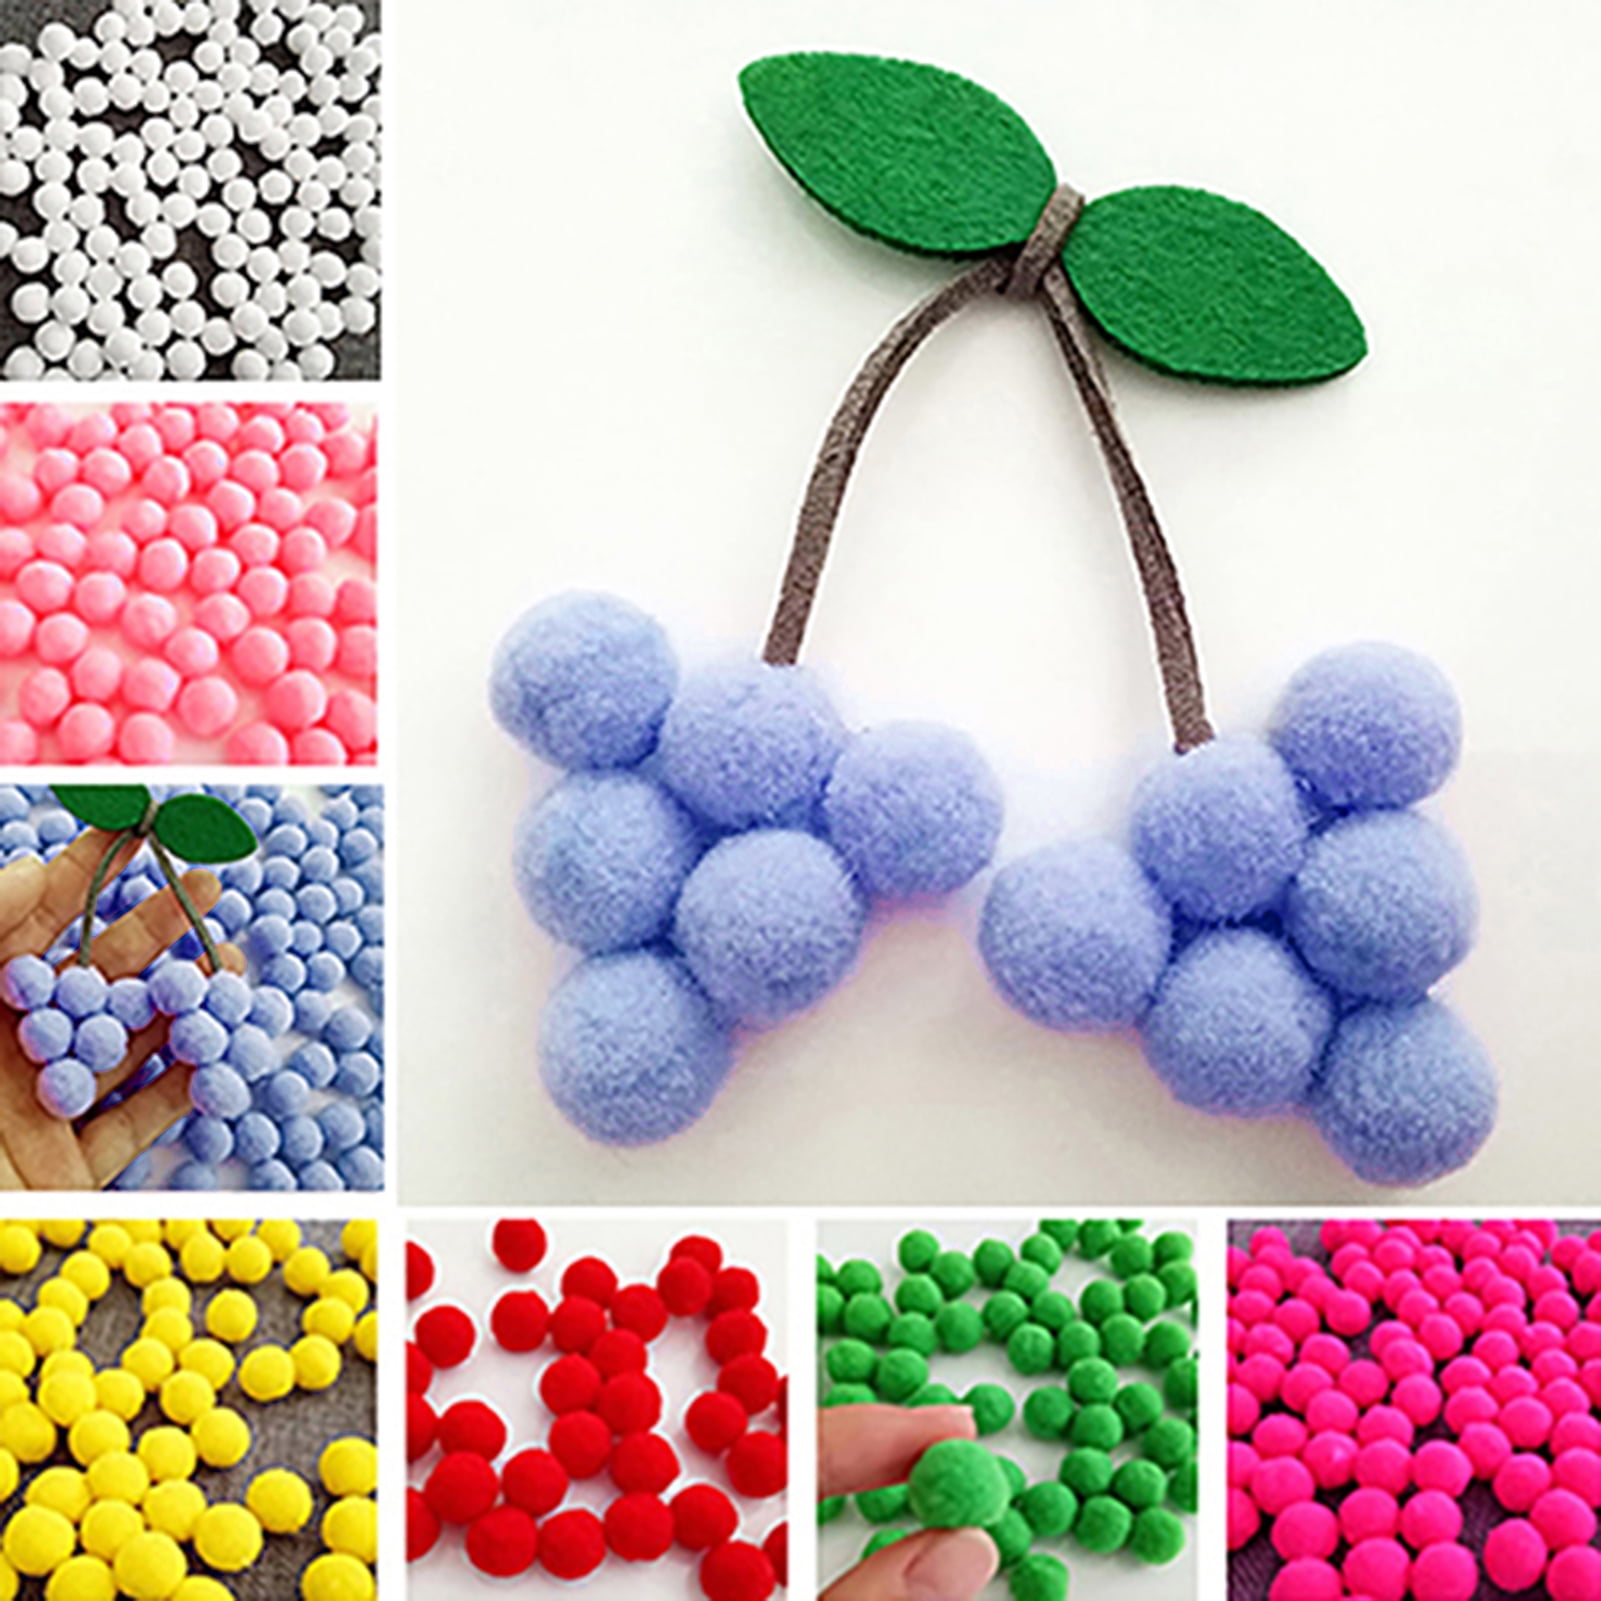 Cotton balls 1.5 inch assorted pom poms for diy creative crafts decorations  assorted colors 200 pack